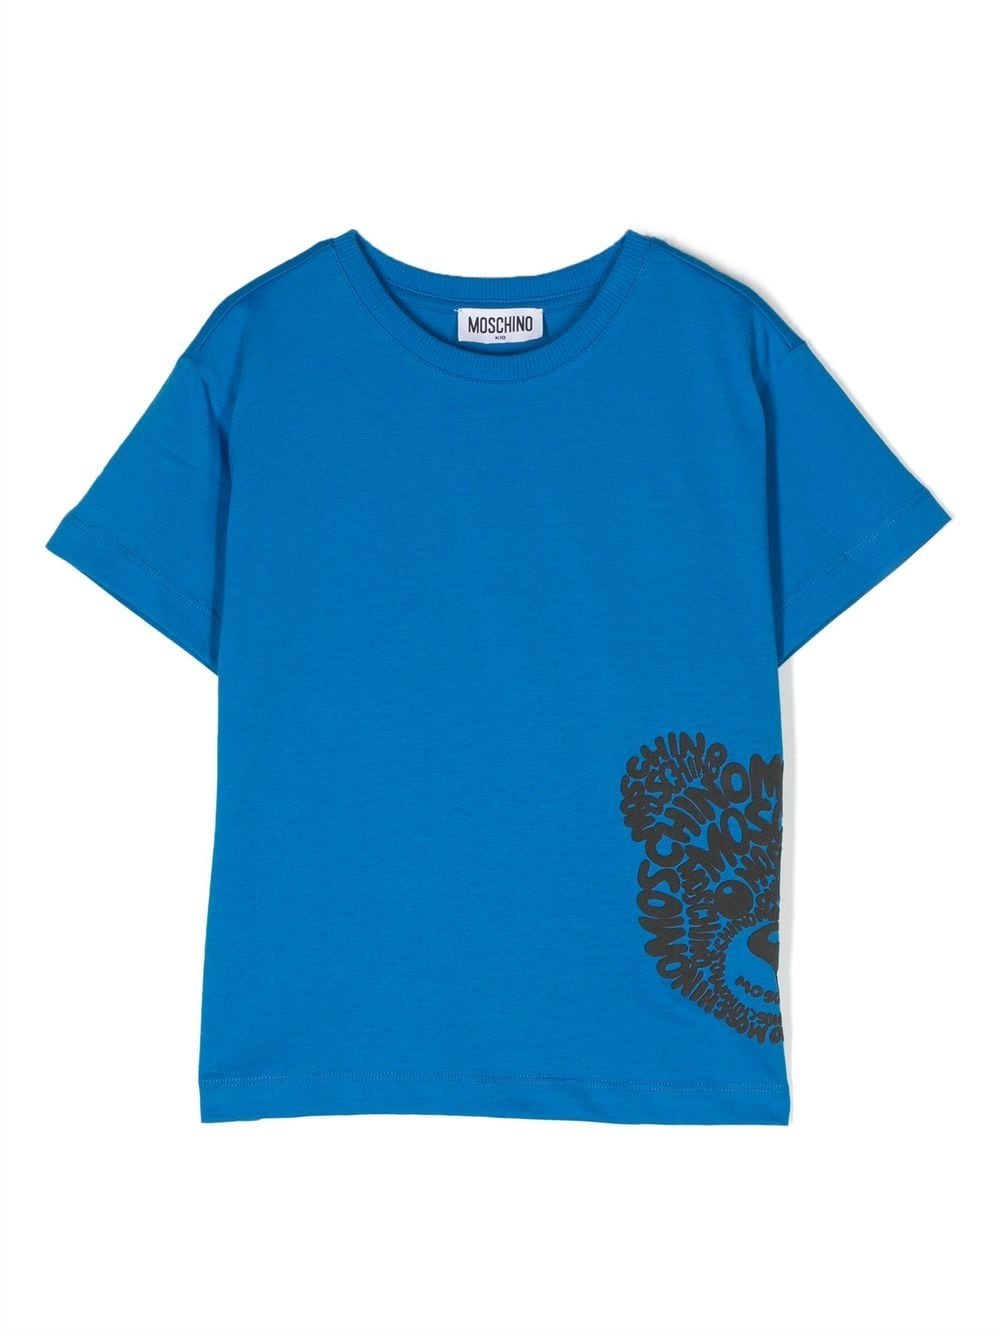 Blue t-shirt for children with print